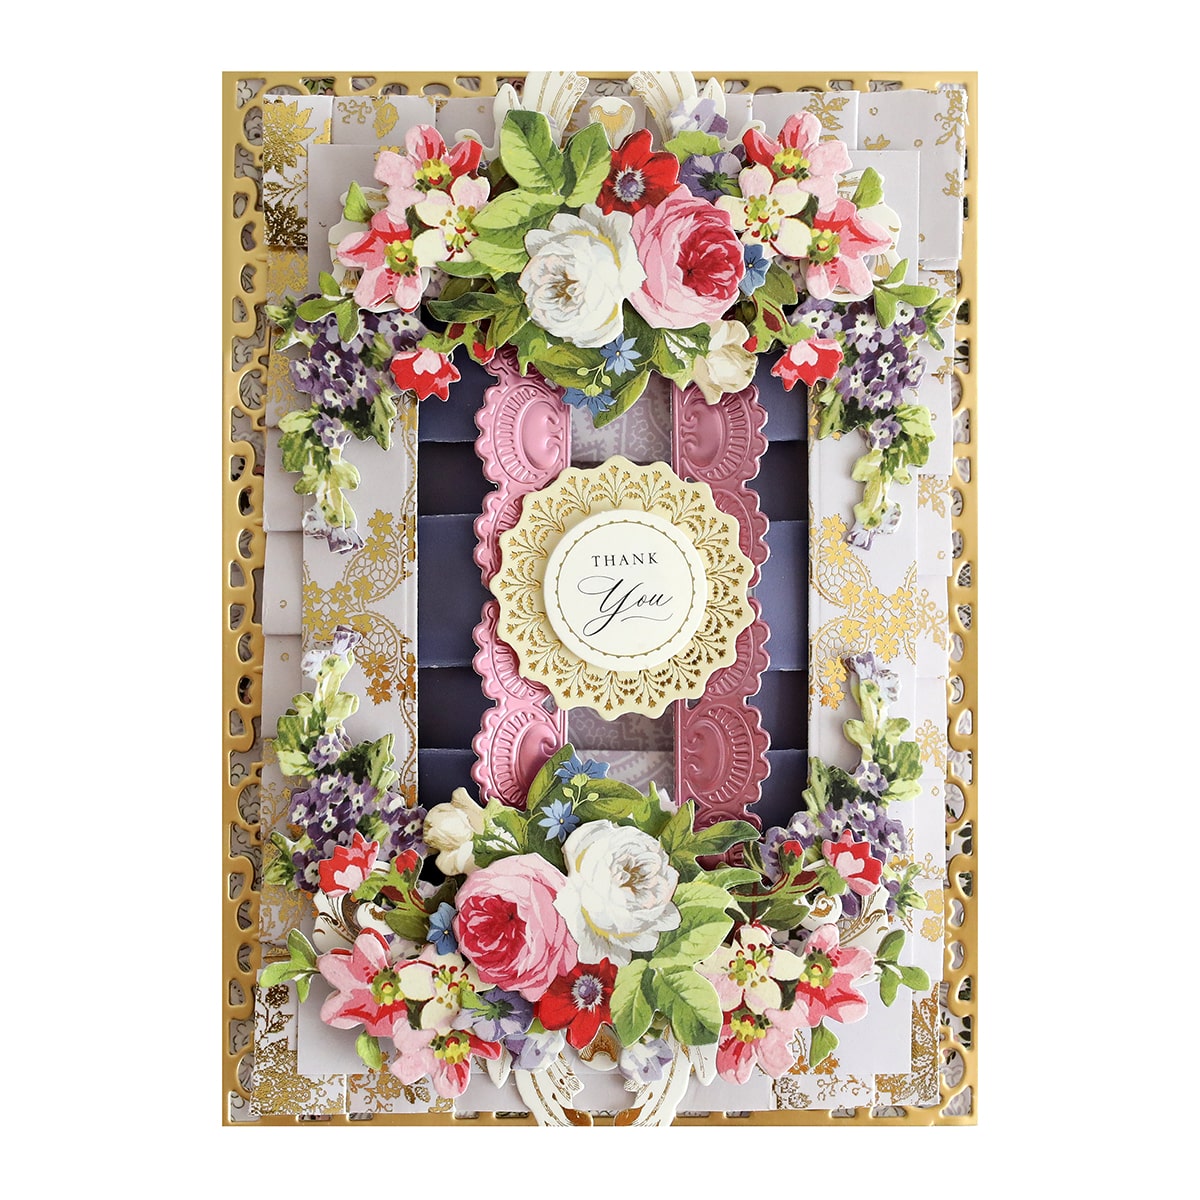 a picture frame with flowers and a clock.